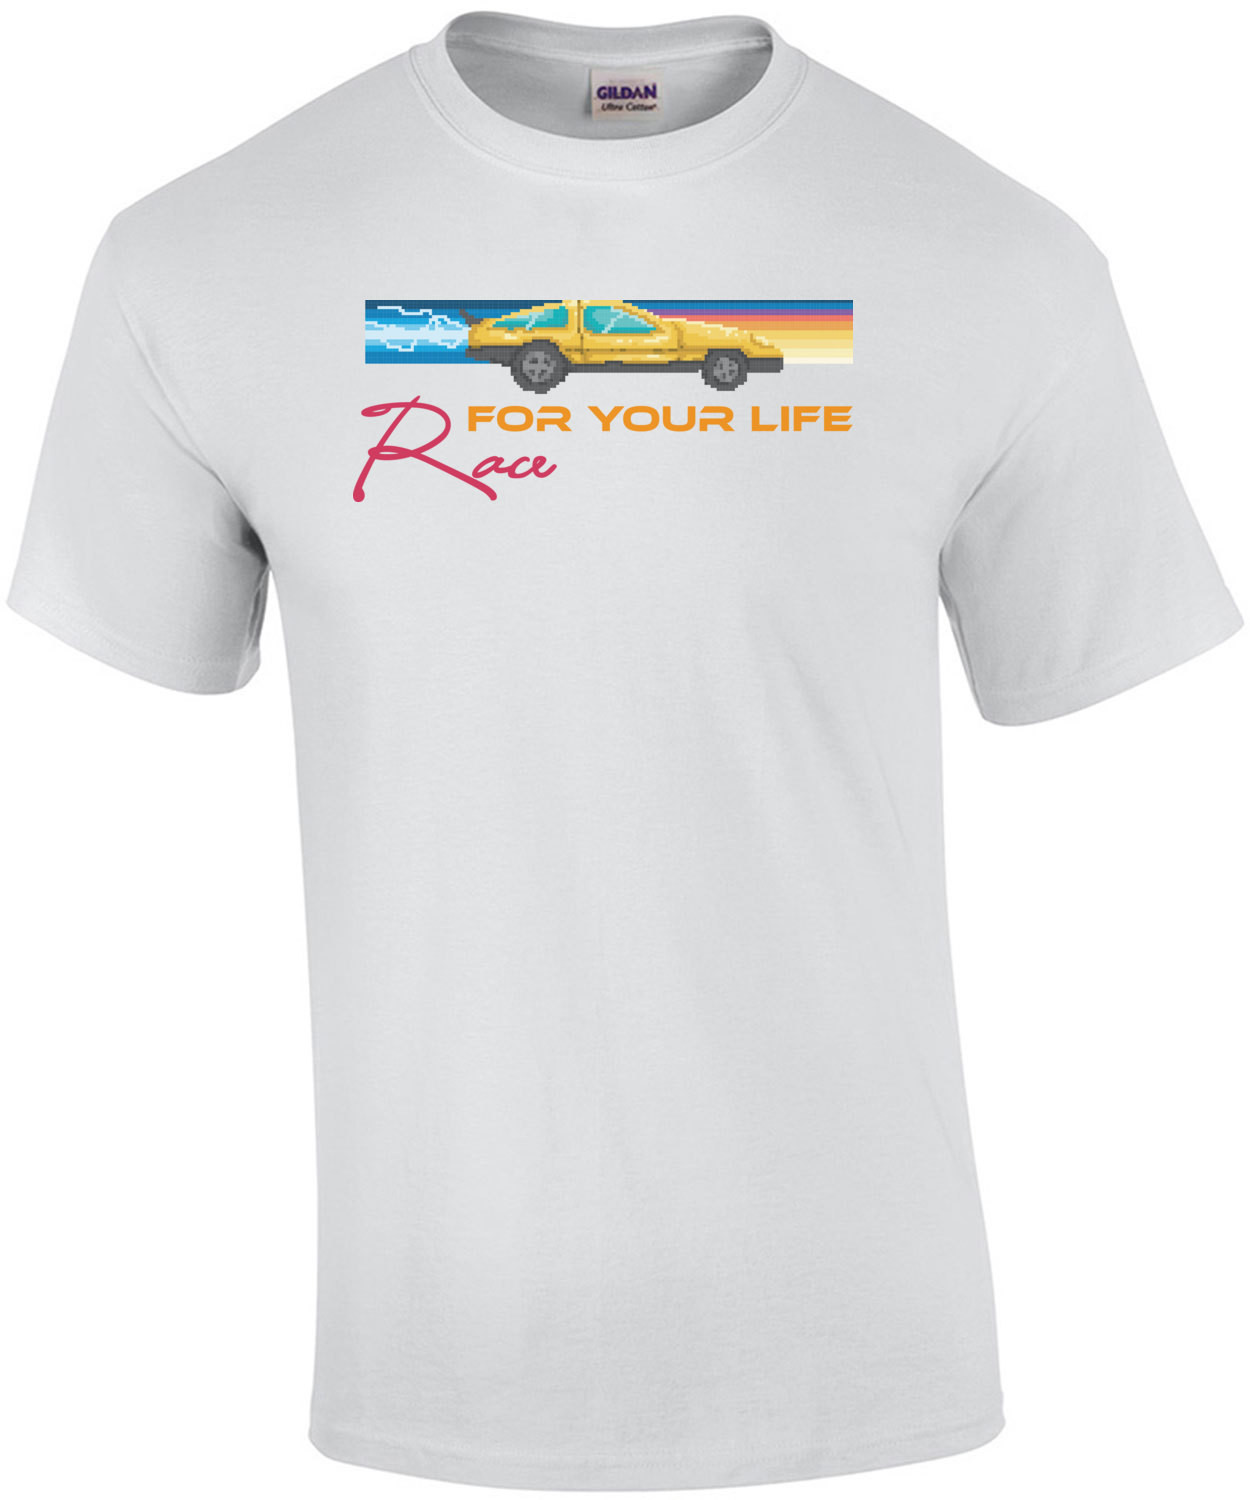 Race For Your Life T-Shirt